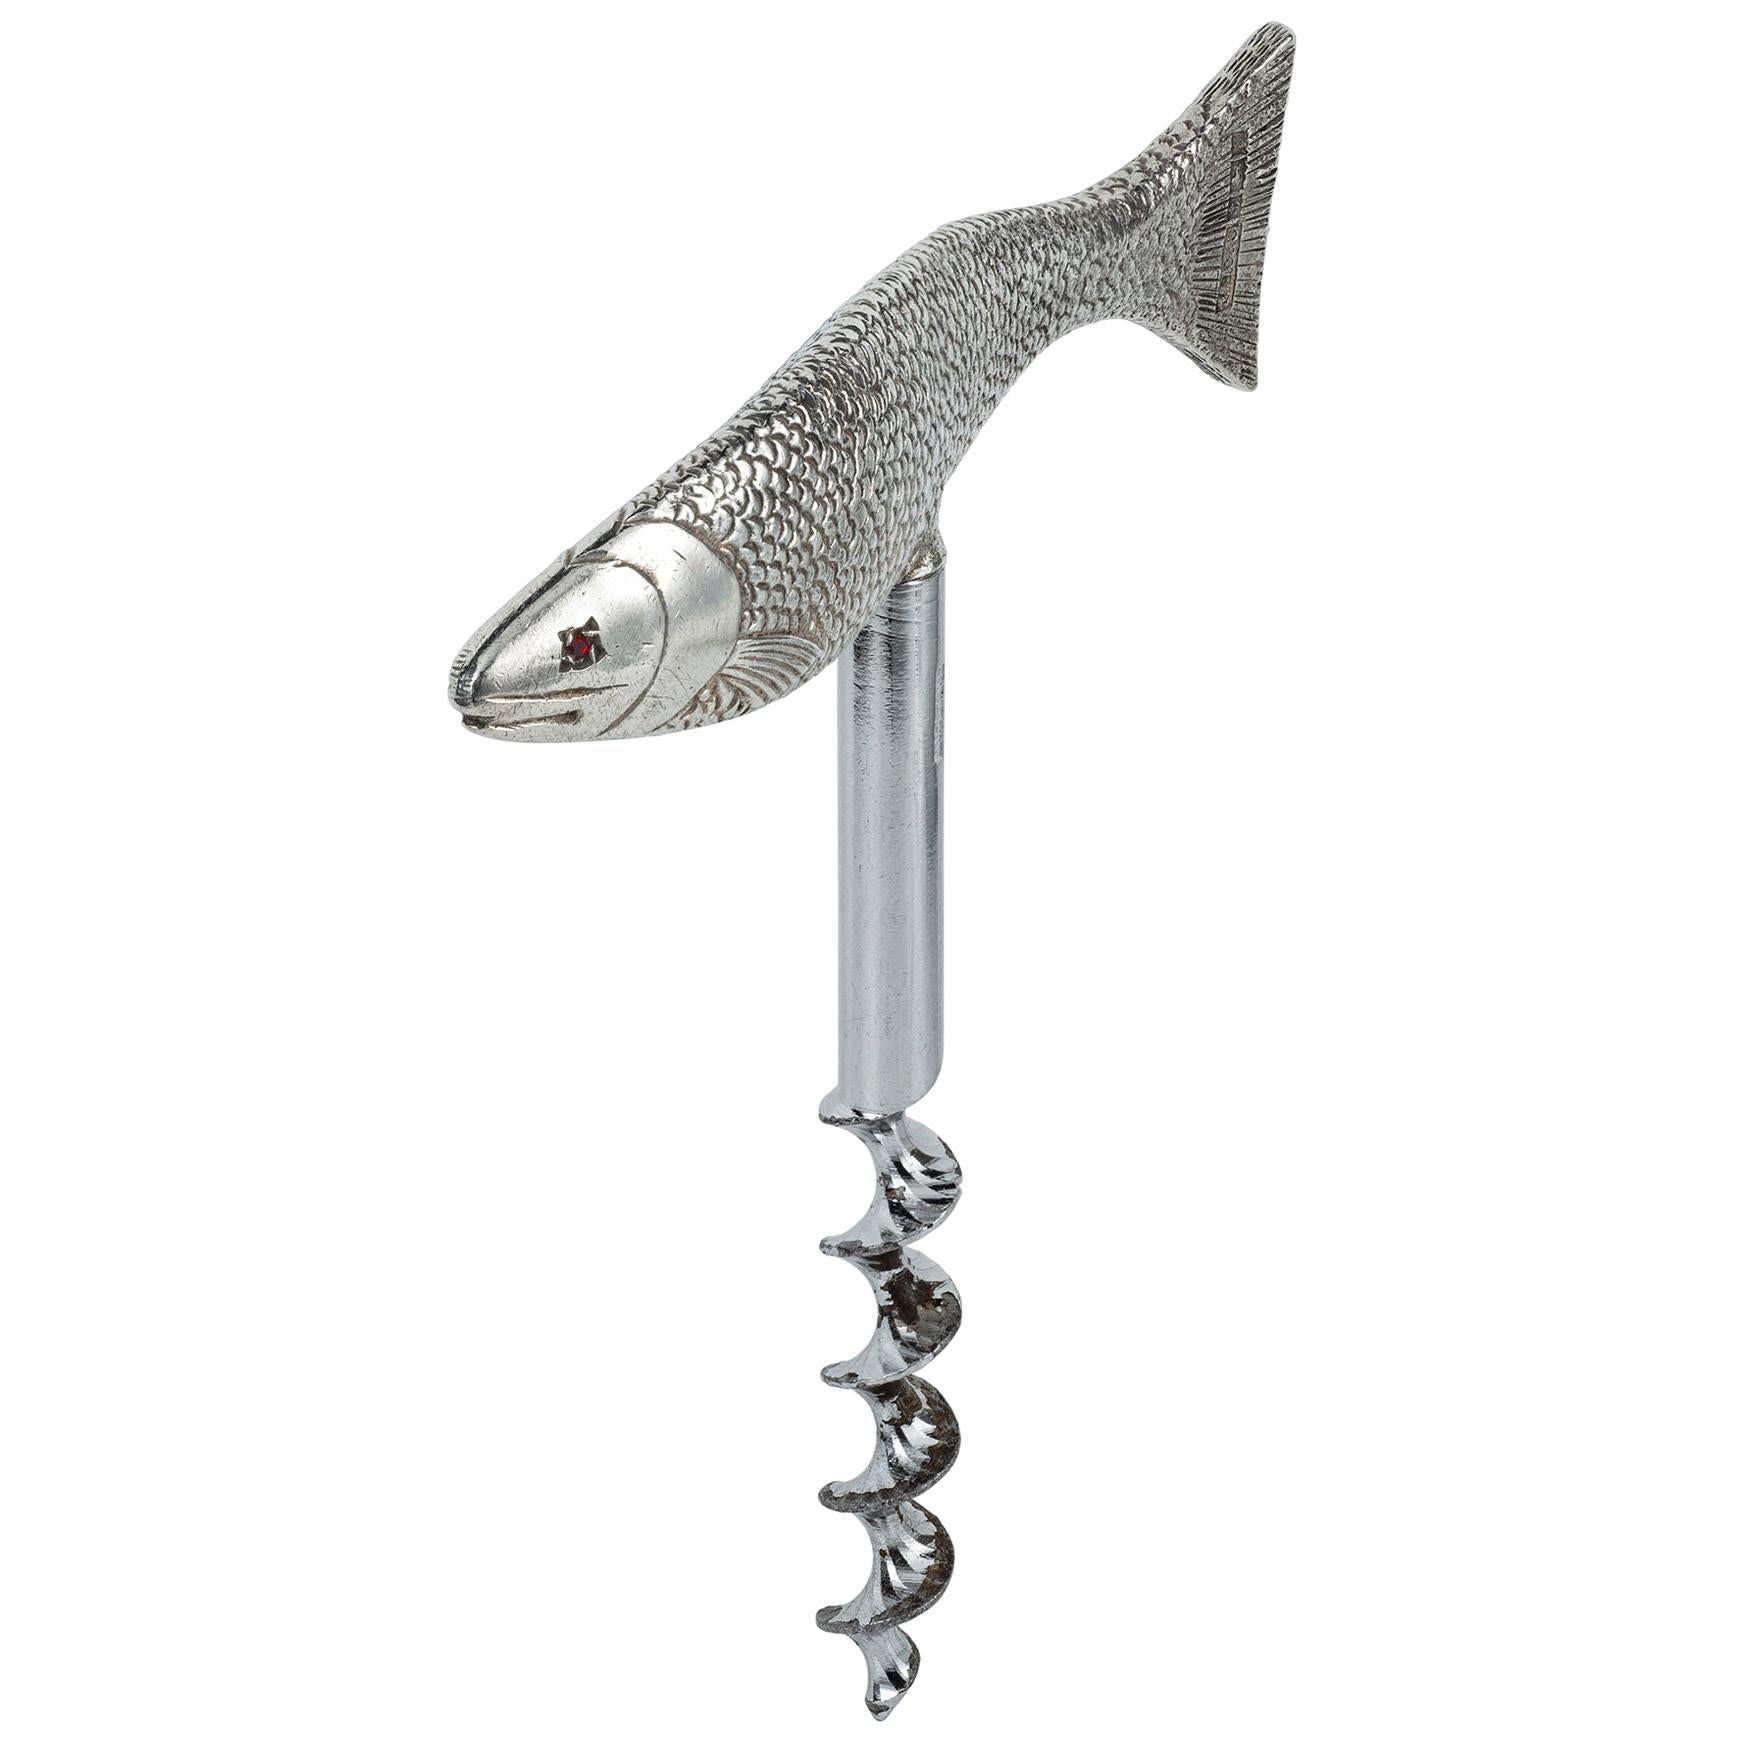 A Sterling Silver Handled Fish Model Cork Screw For Sale